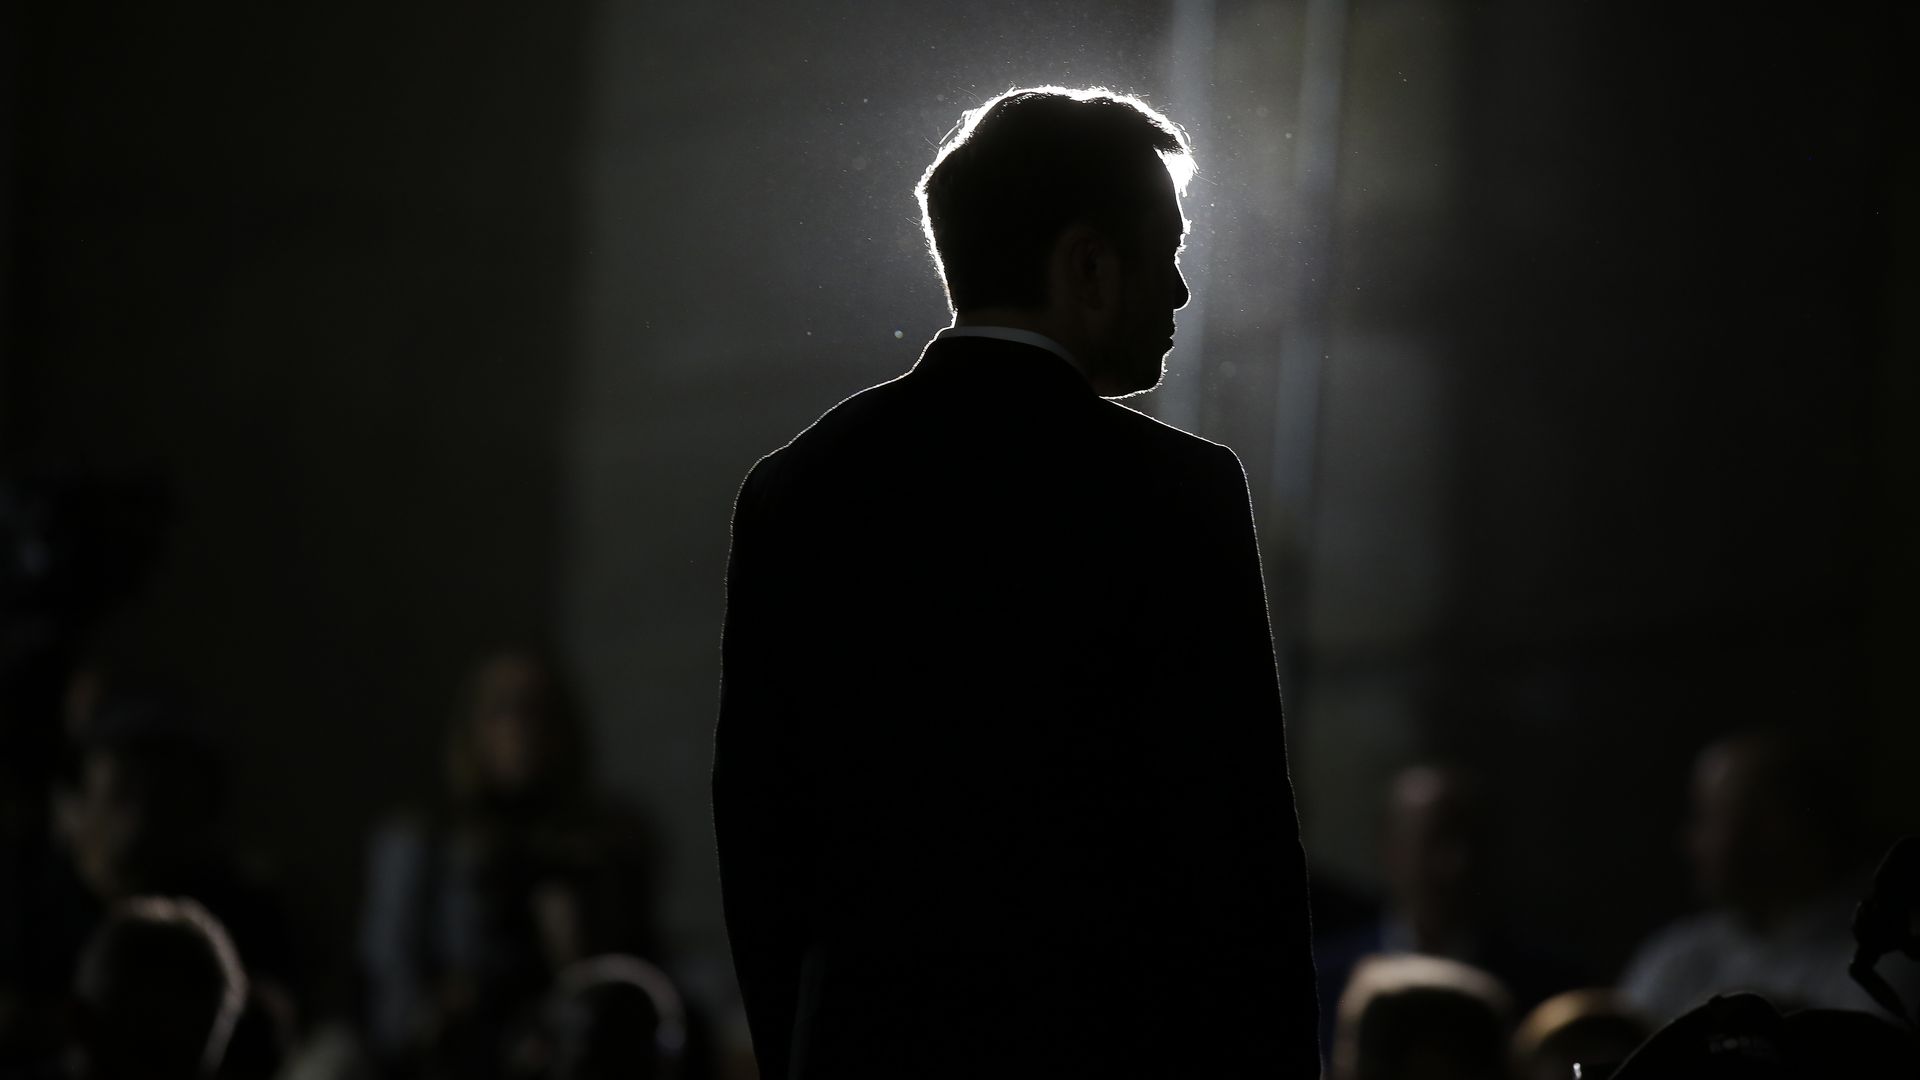 The silhouette of Elon Musk. 